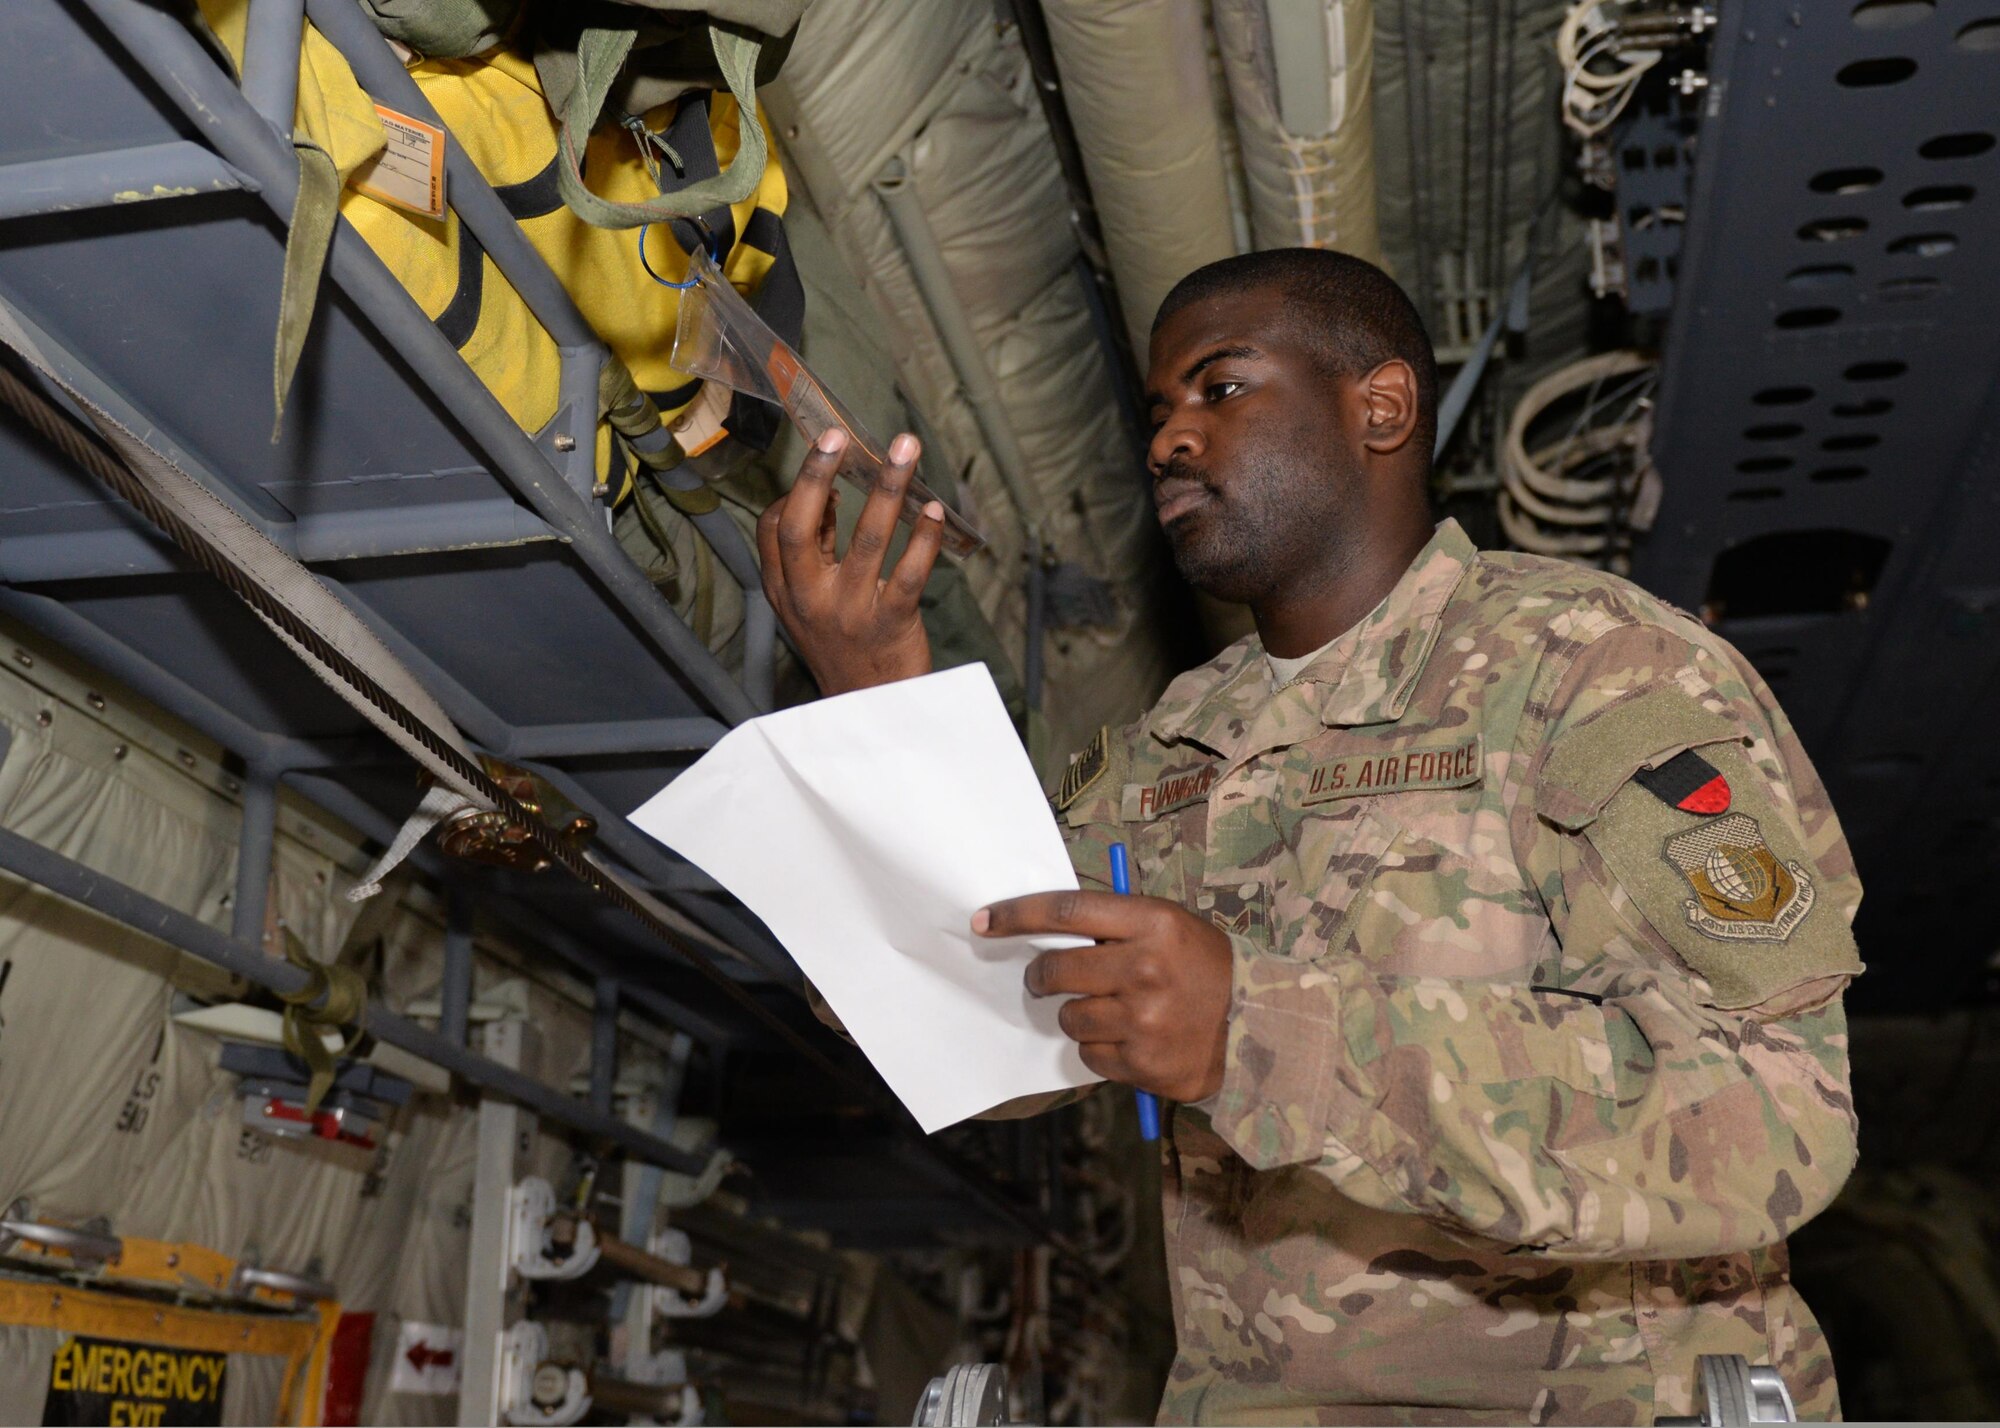 U.S. Air Force Senior Airman Greg Flannigan, 455th Expeditionary Airlift Squadron aircrew flight equipment journeyman, inspects aircrew flight equipment July 17, 2015, at Bagram Airfield, Afghanistan. Flannigan is responsible for making sure C-130 aircrews are supplied with lifesaving equipment prior to flying a mission here. (U.S. Air Force photo by Senior Airman Cierra Presentado/Released)